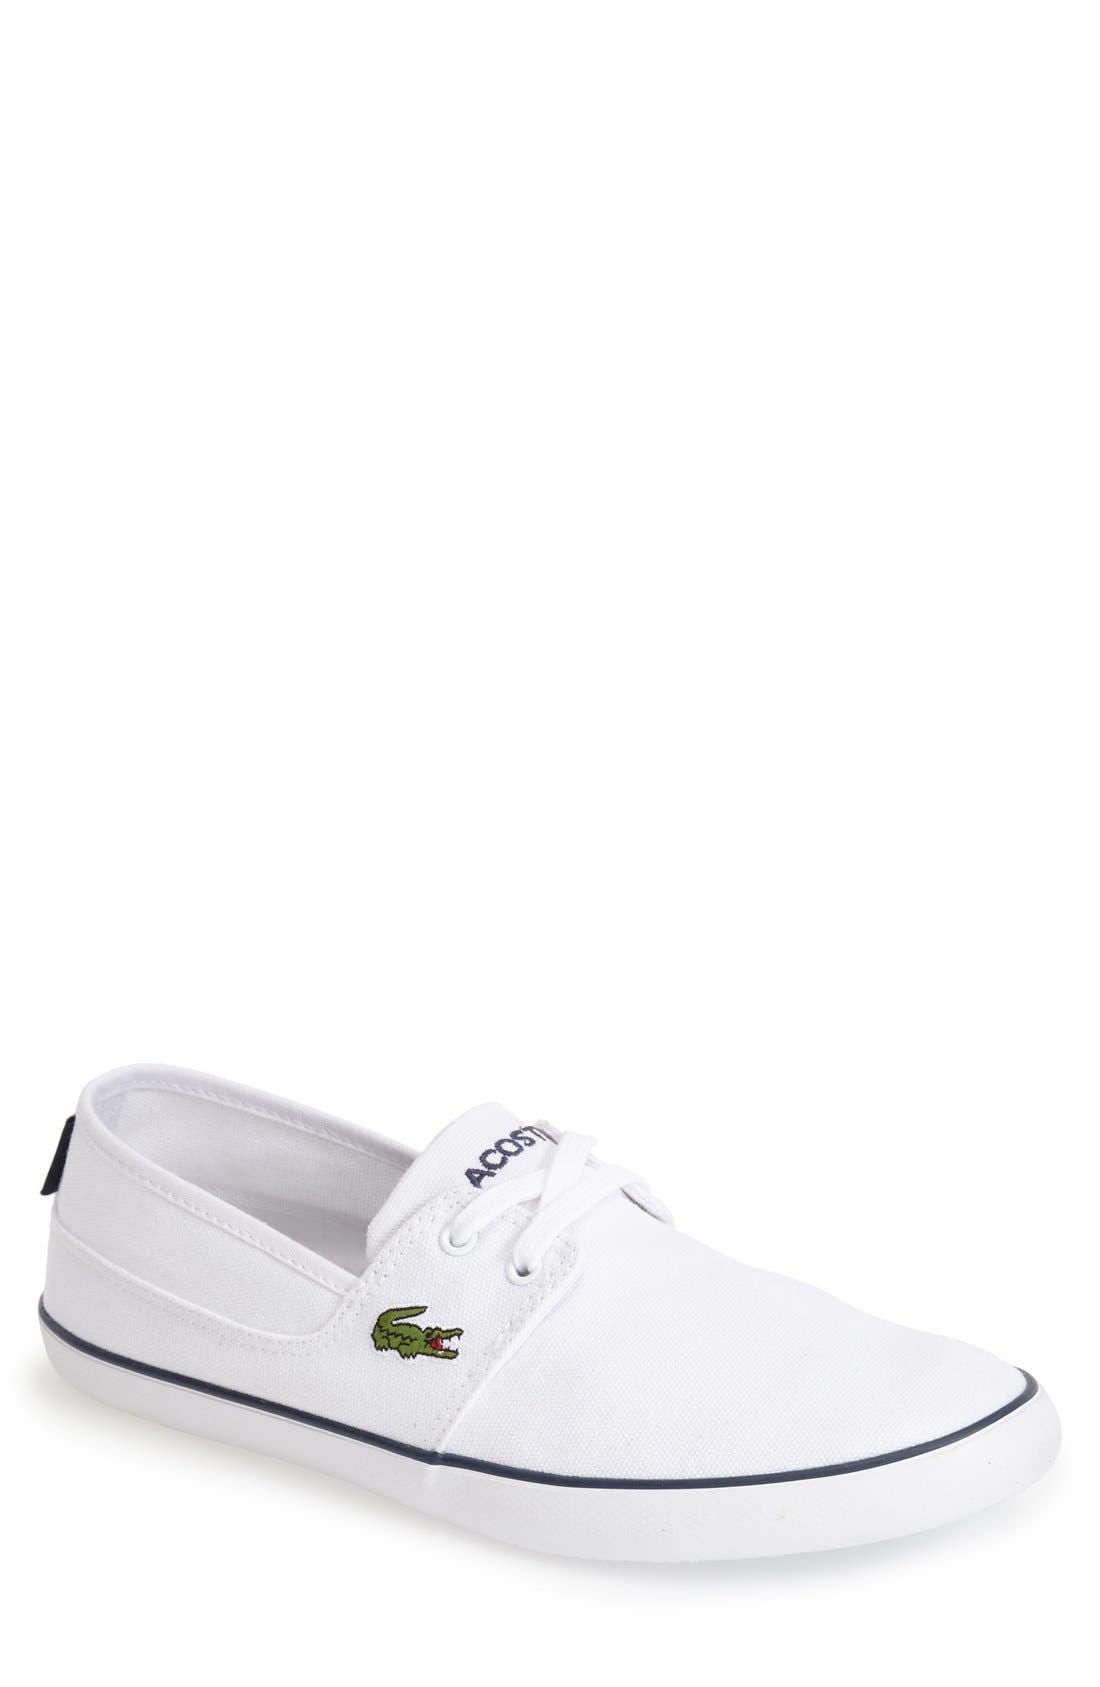 marice lace lacoste